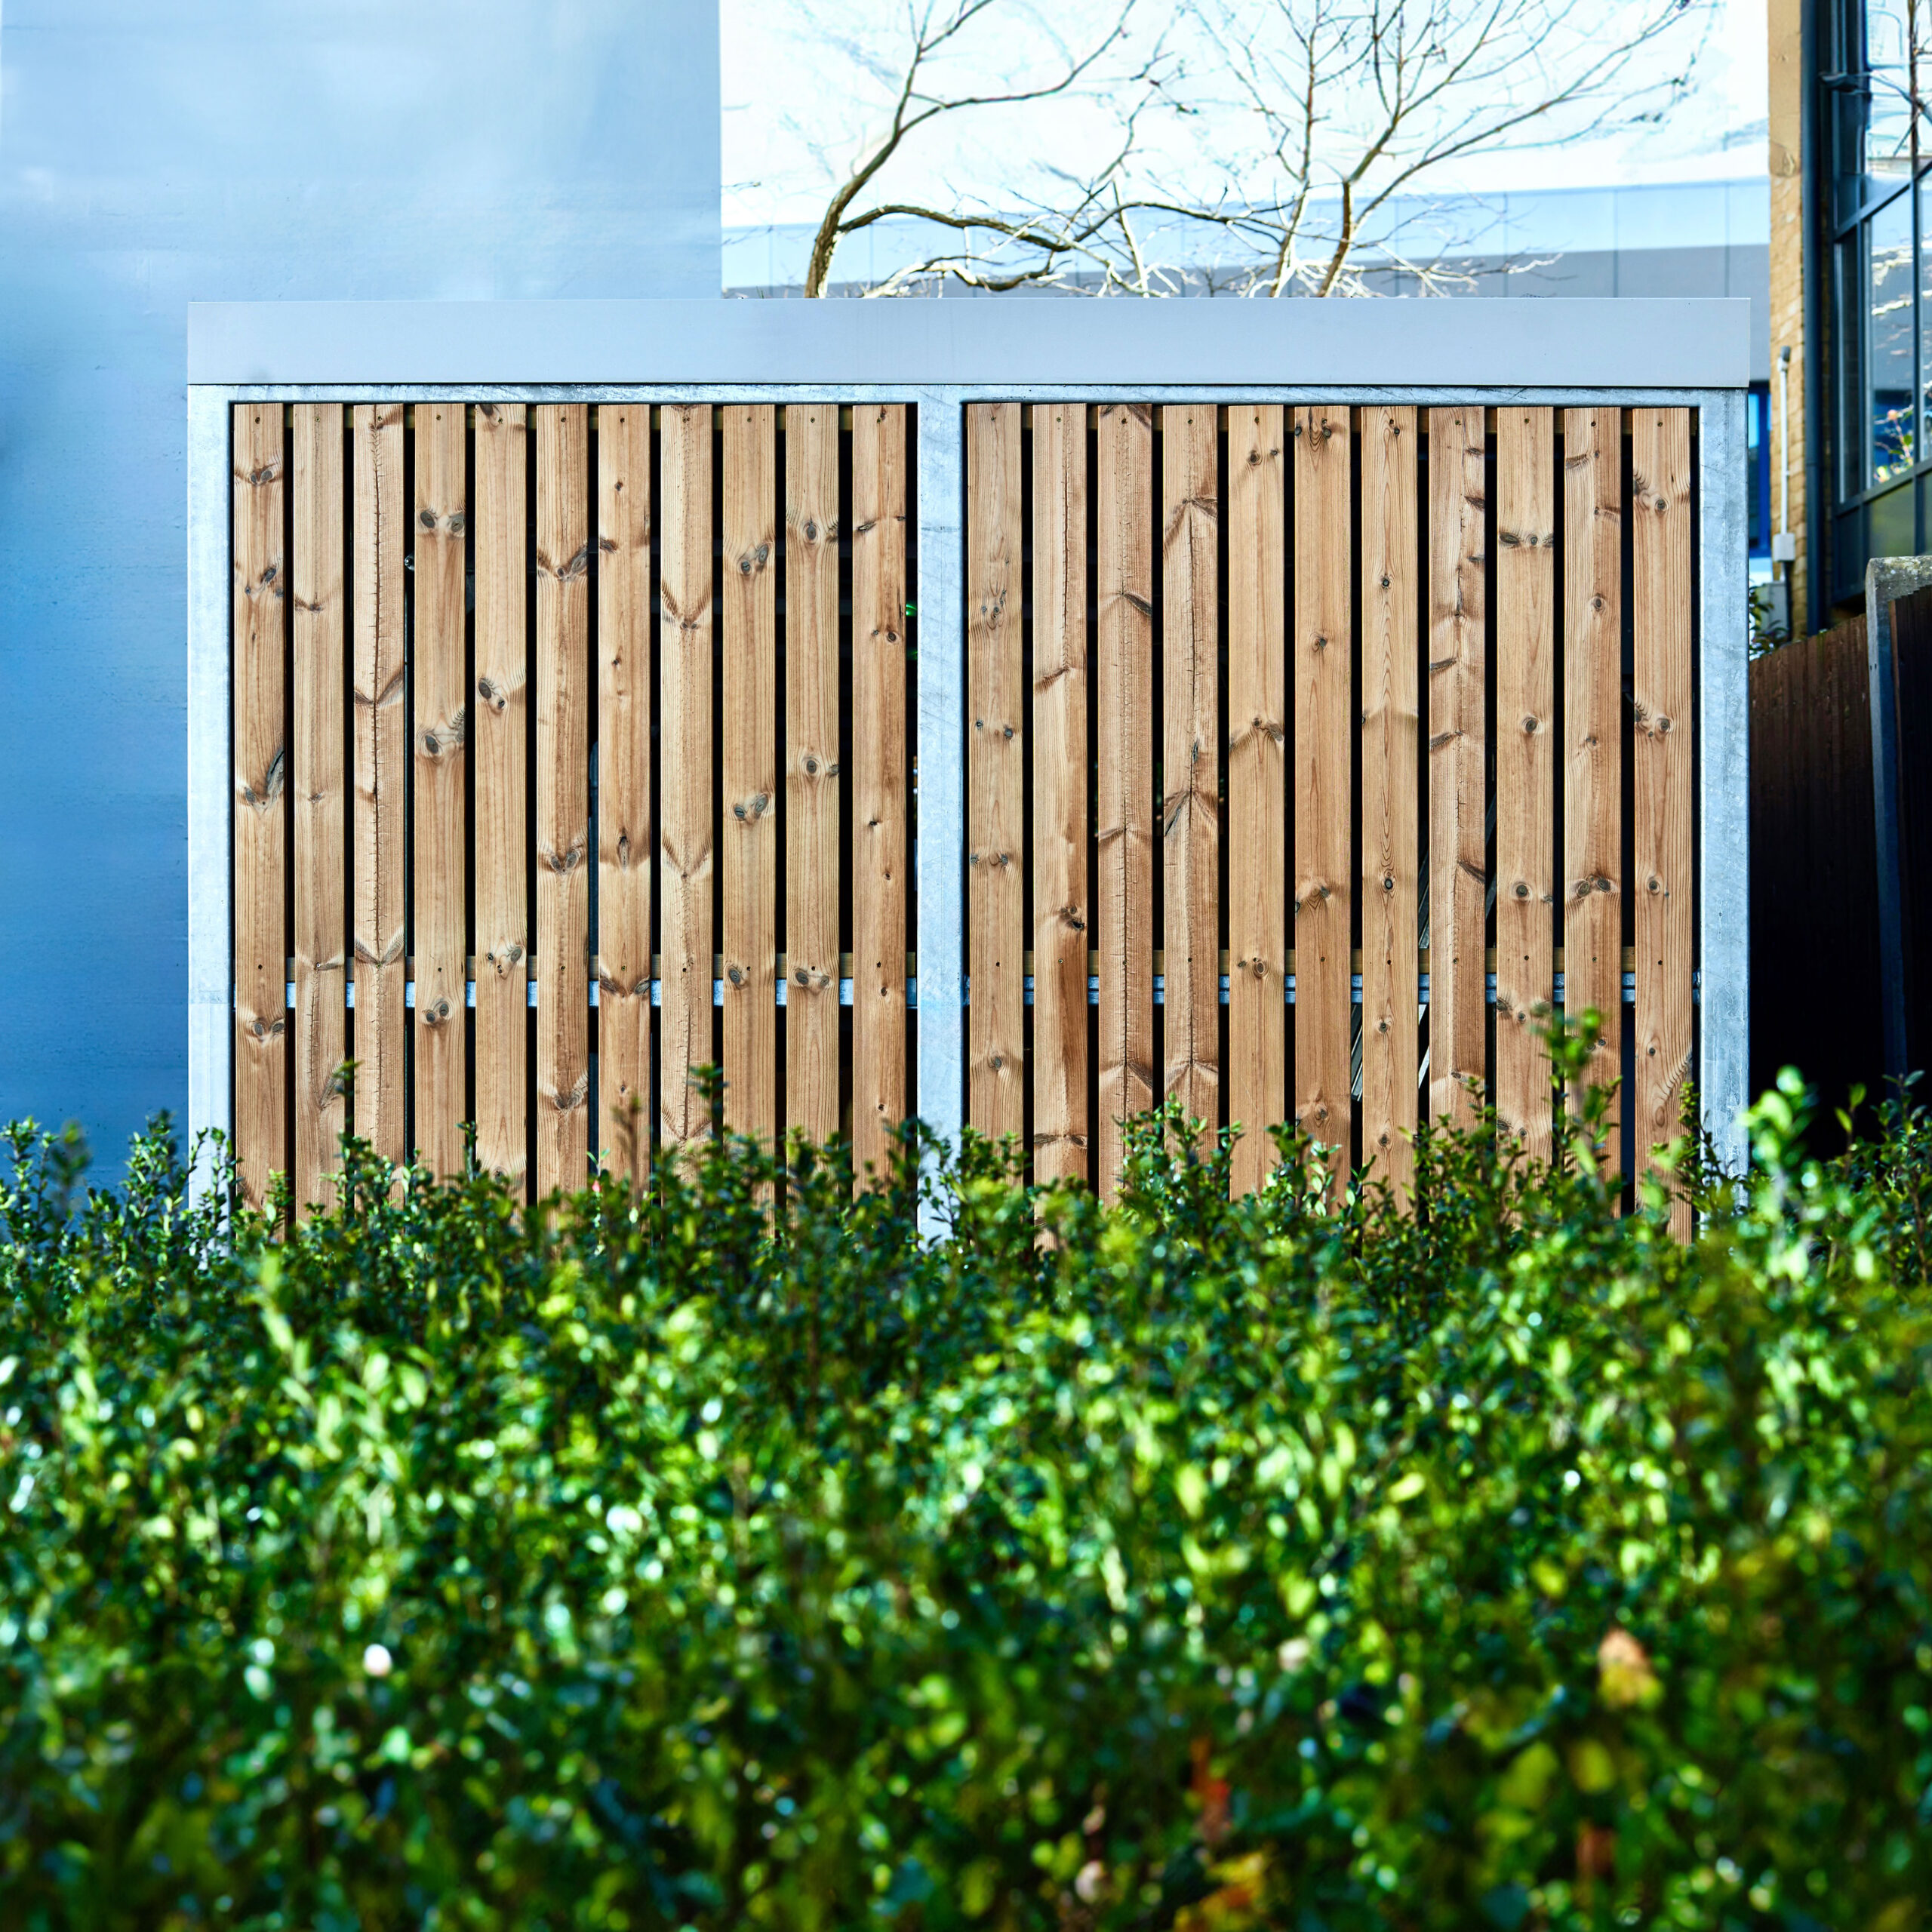 Amazon Semi Vertical Cycle Shelter with Timber Cladding infront of a bush installed outside of a commercial building